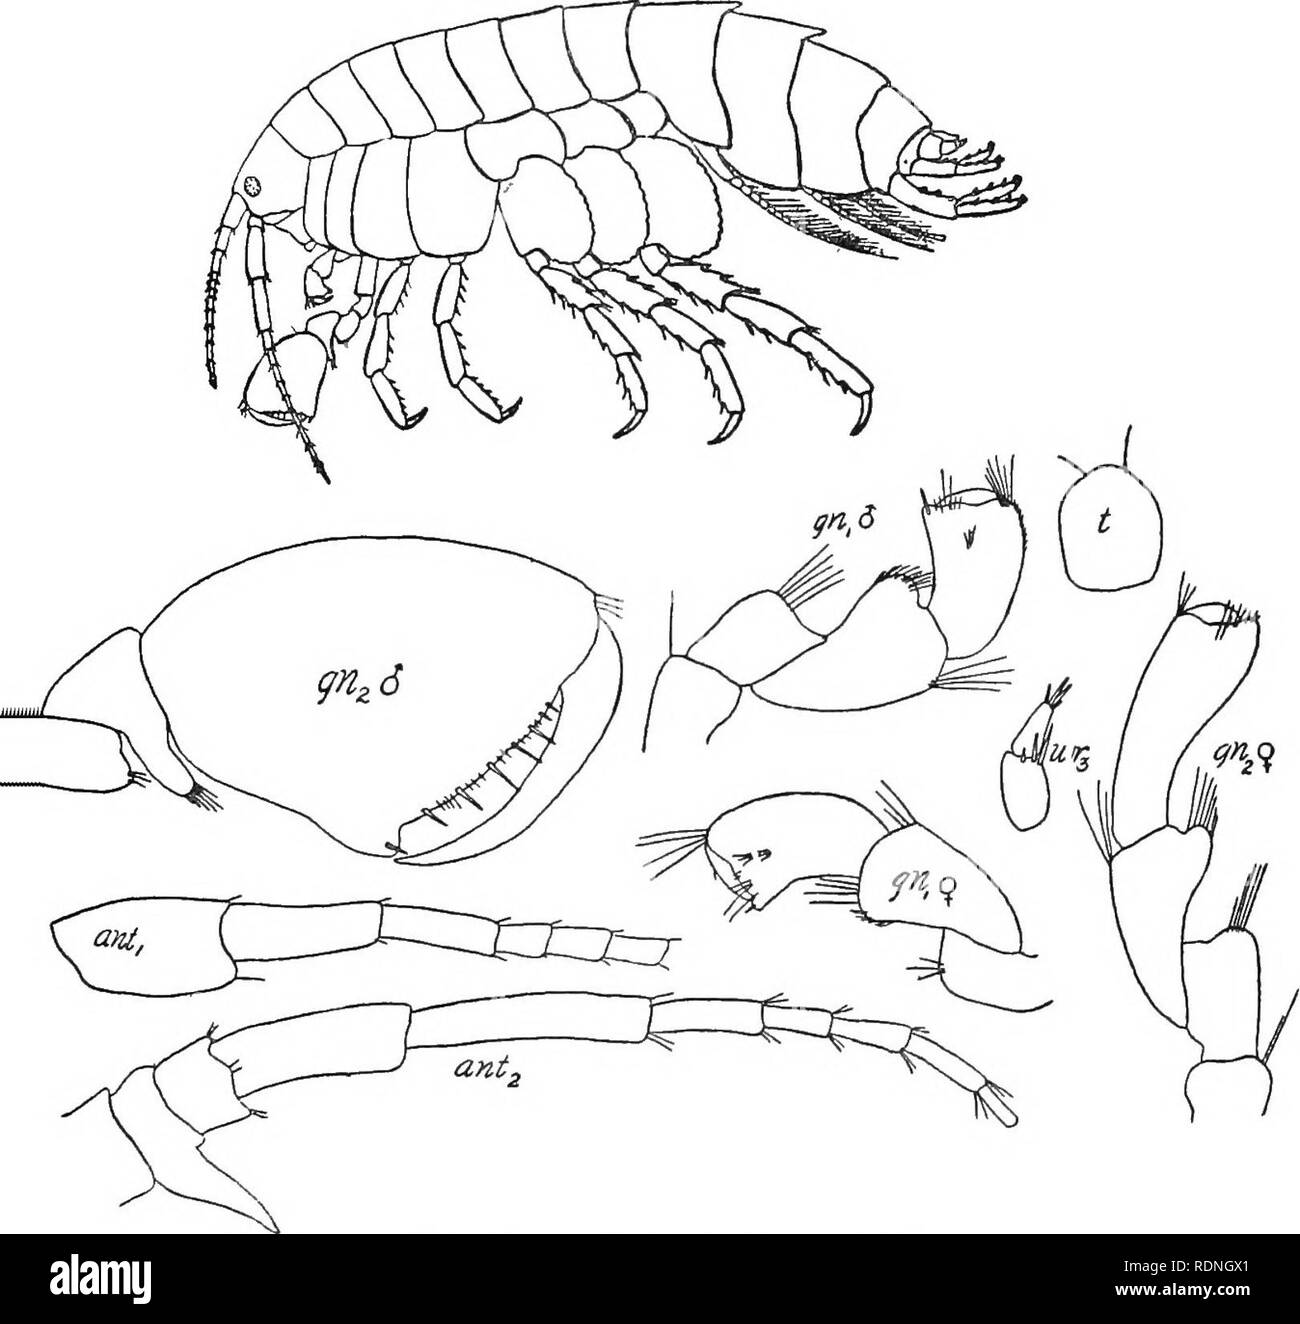 . The Arthrostraca of Connecticut. Malacostraca. No. 26.] ARTHROSTRACA OF CONNECTICUT. 129 gnathopods in male with carpus produced behind between merus and propodus. Telson entire. Hyalella knickerbockeri (Bate).. Fig. 36. Hyalella knickerbockeri. 1862. Allorchestes knickerbockeri, Bate, Cat. Amphipoda. Brit. Mus., p. 36, pi. 6. 1874. Hyalella dentata, Smith, Rep. U. S. Fish. Com., 1872-3, p. 645, pi. 2. 1907. Hyallela knickerbockeri, Weckel, Proc. U. S. Nat. Mus., vol. 32, p. 54. 9. Please note that these images are extracted from scanned page images that may have been digitally enhanced for  Stock Photo